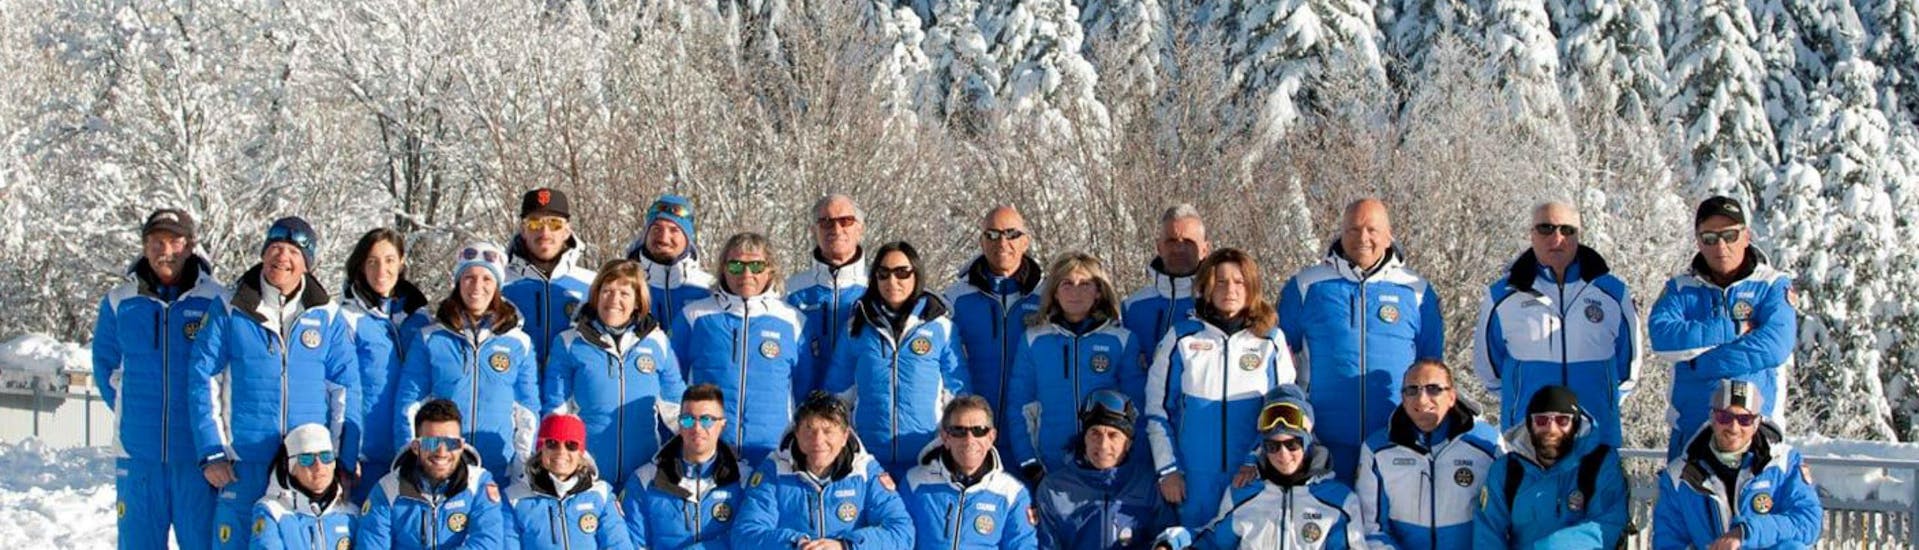 The ski instructors from the ski school Scuola di Sci Abetone are gathered in the snow with smiling faces that invite everyone to join their ski lessons.